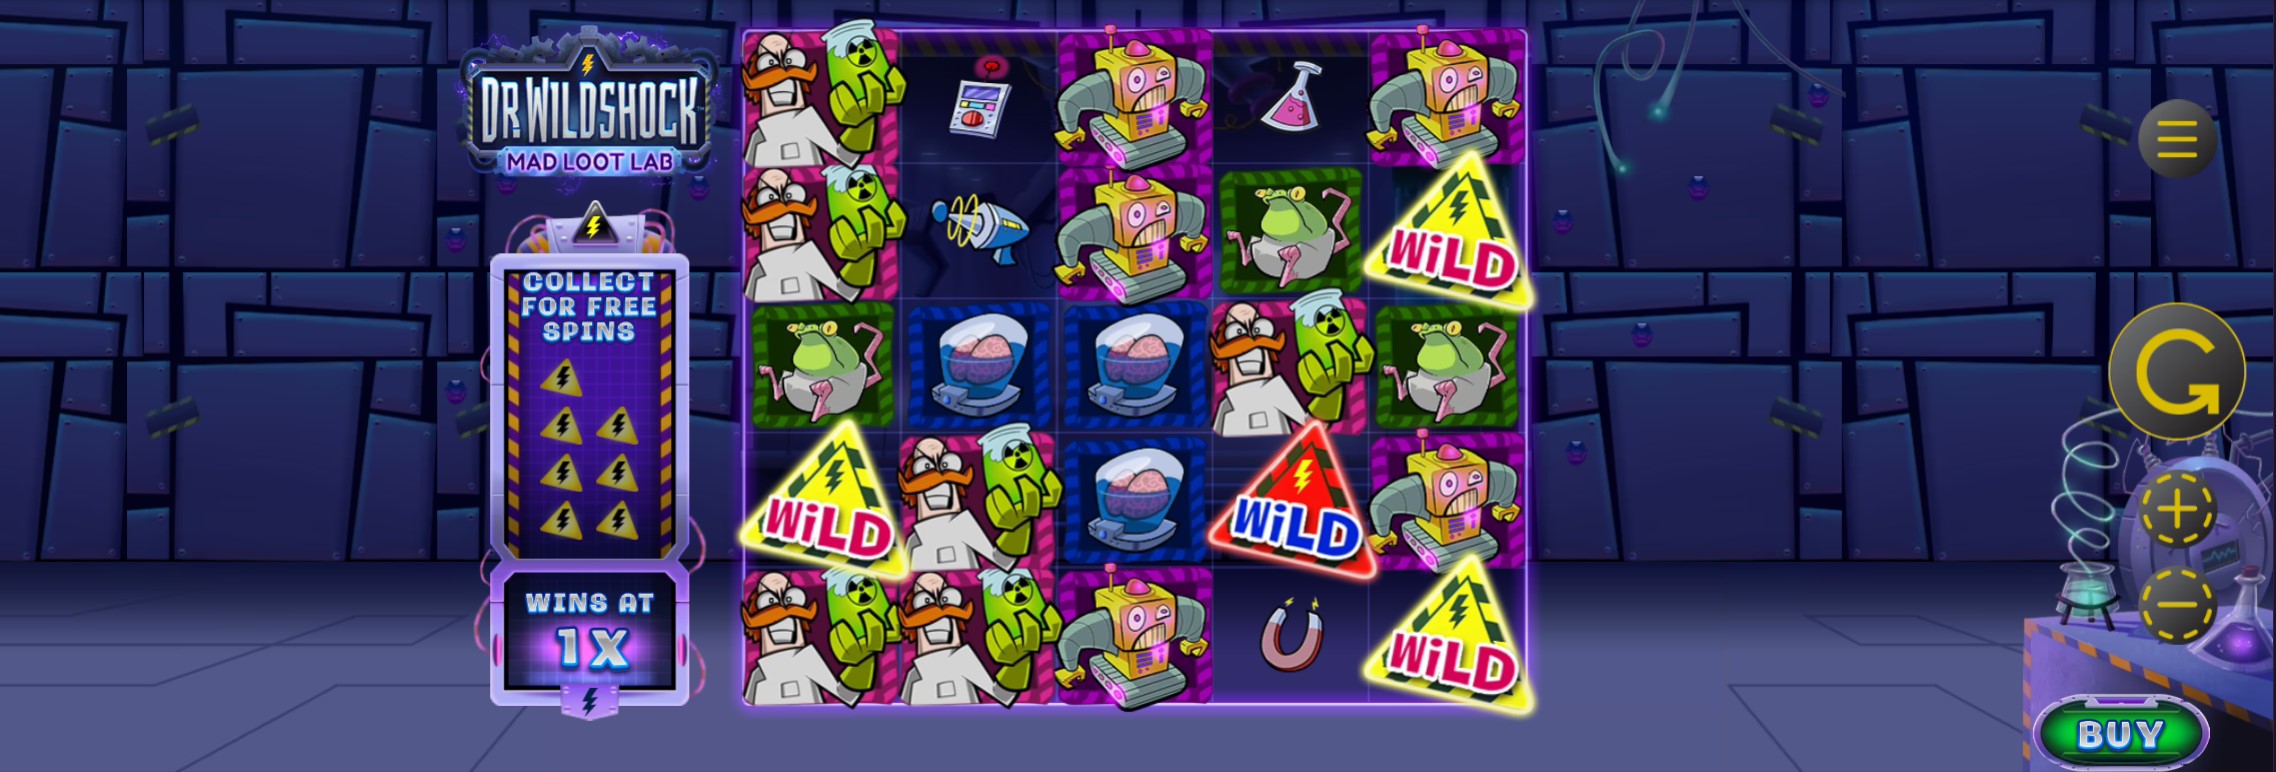 Dr Wildshock Mad Loot Lab Slot Review